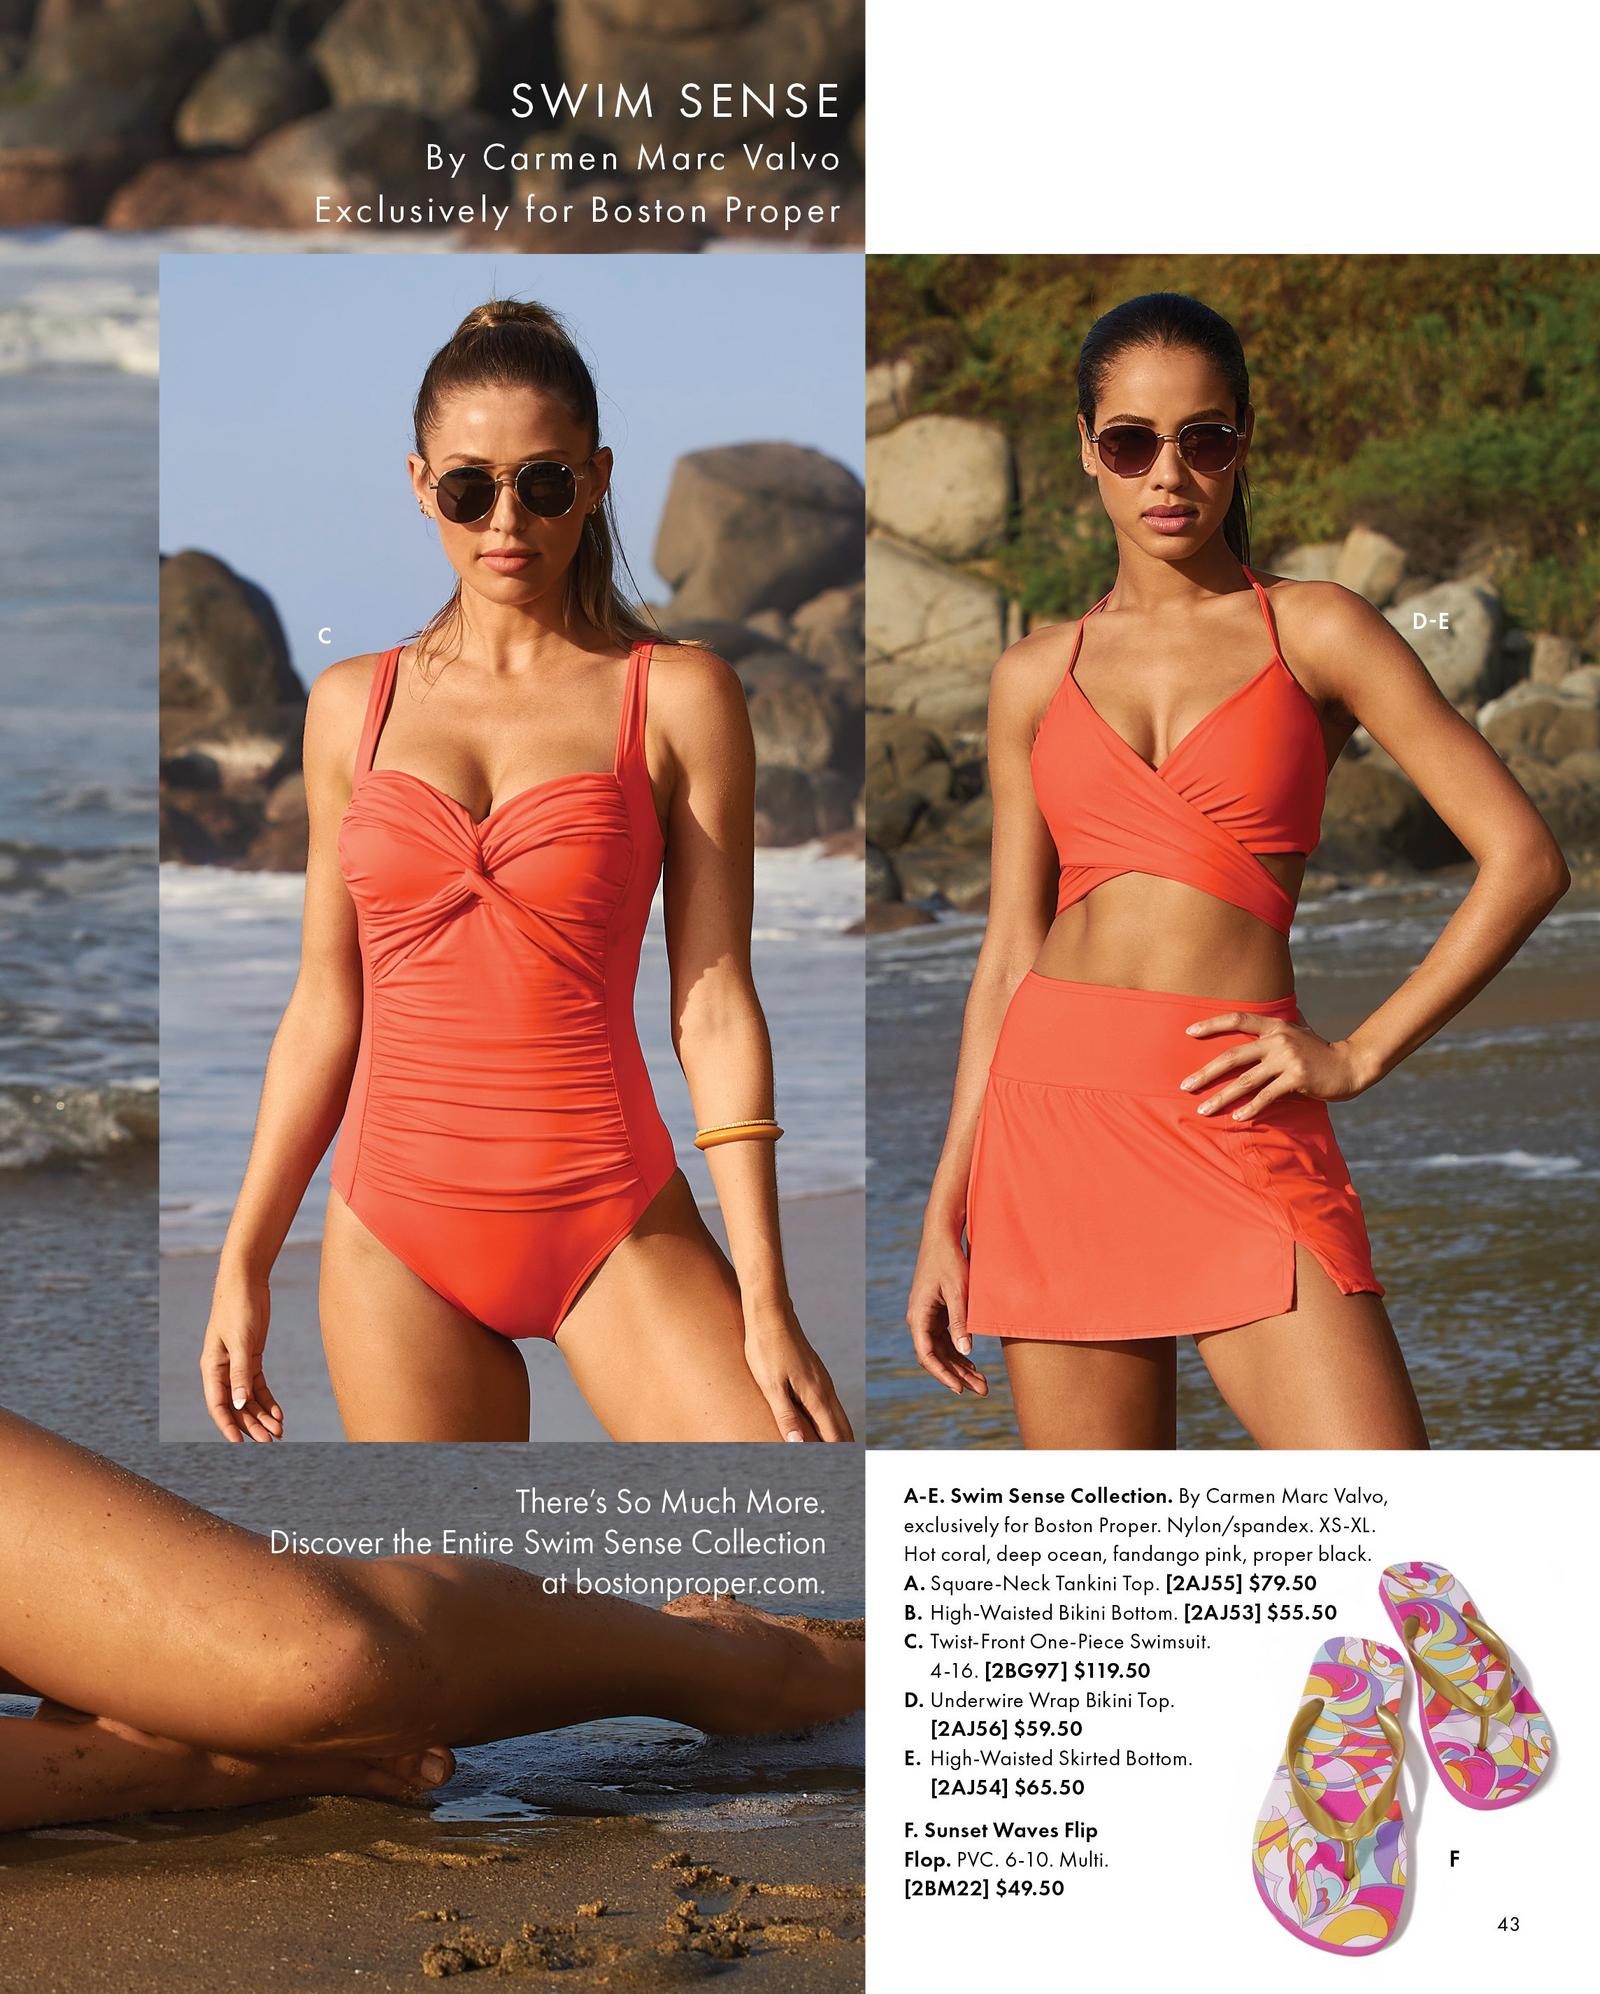 left model wearing an orange one-piece swimsuit. right model wearing an order bikini top and orange skirted bottoms. also shown: multicolored patterned sandals.